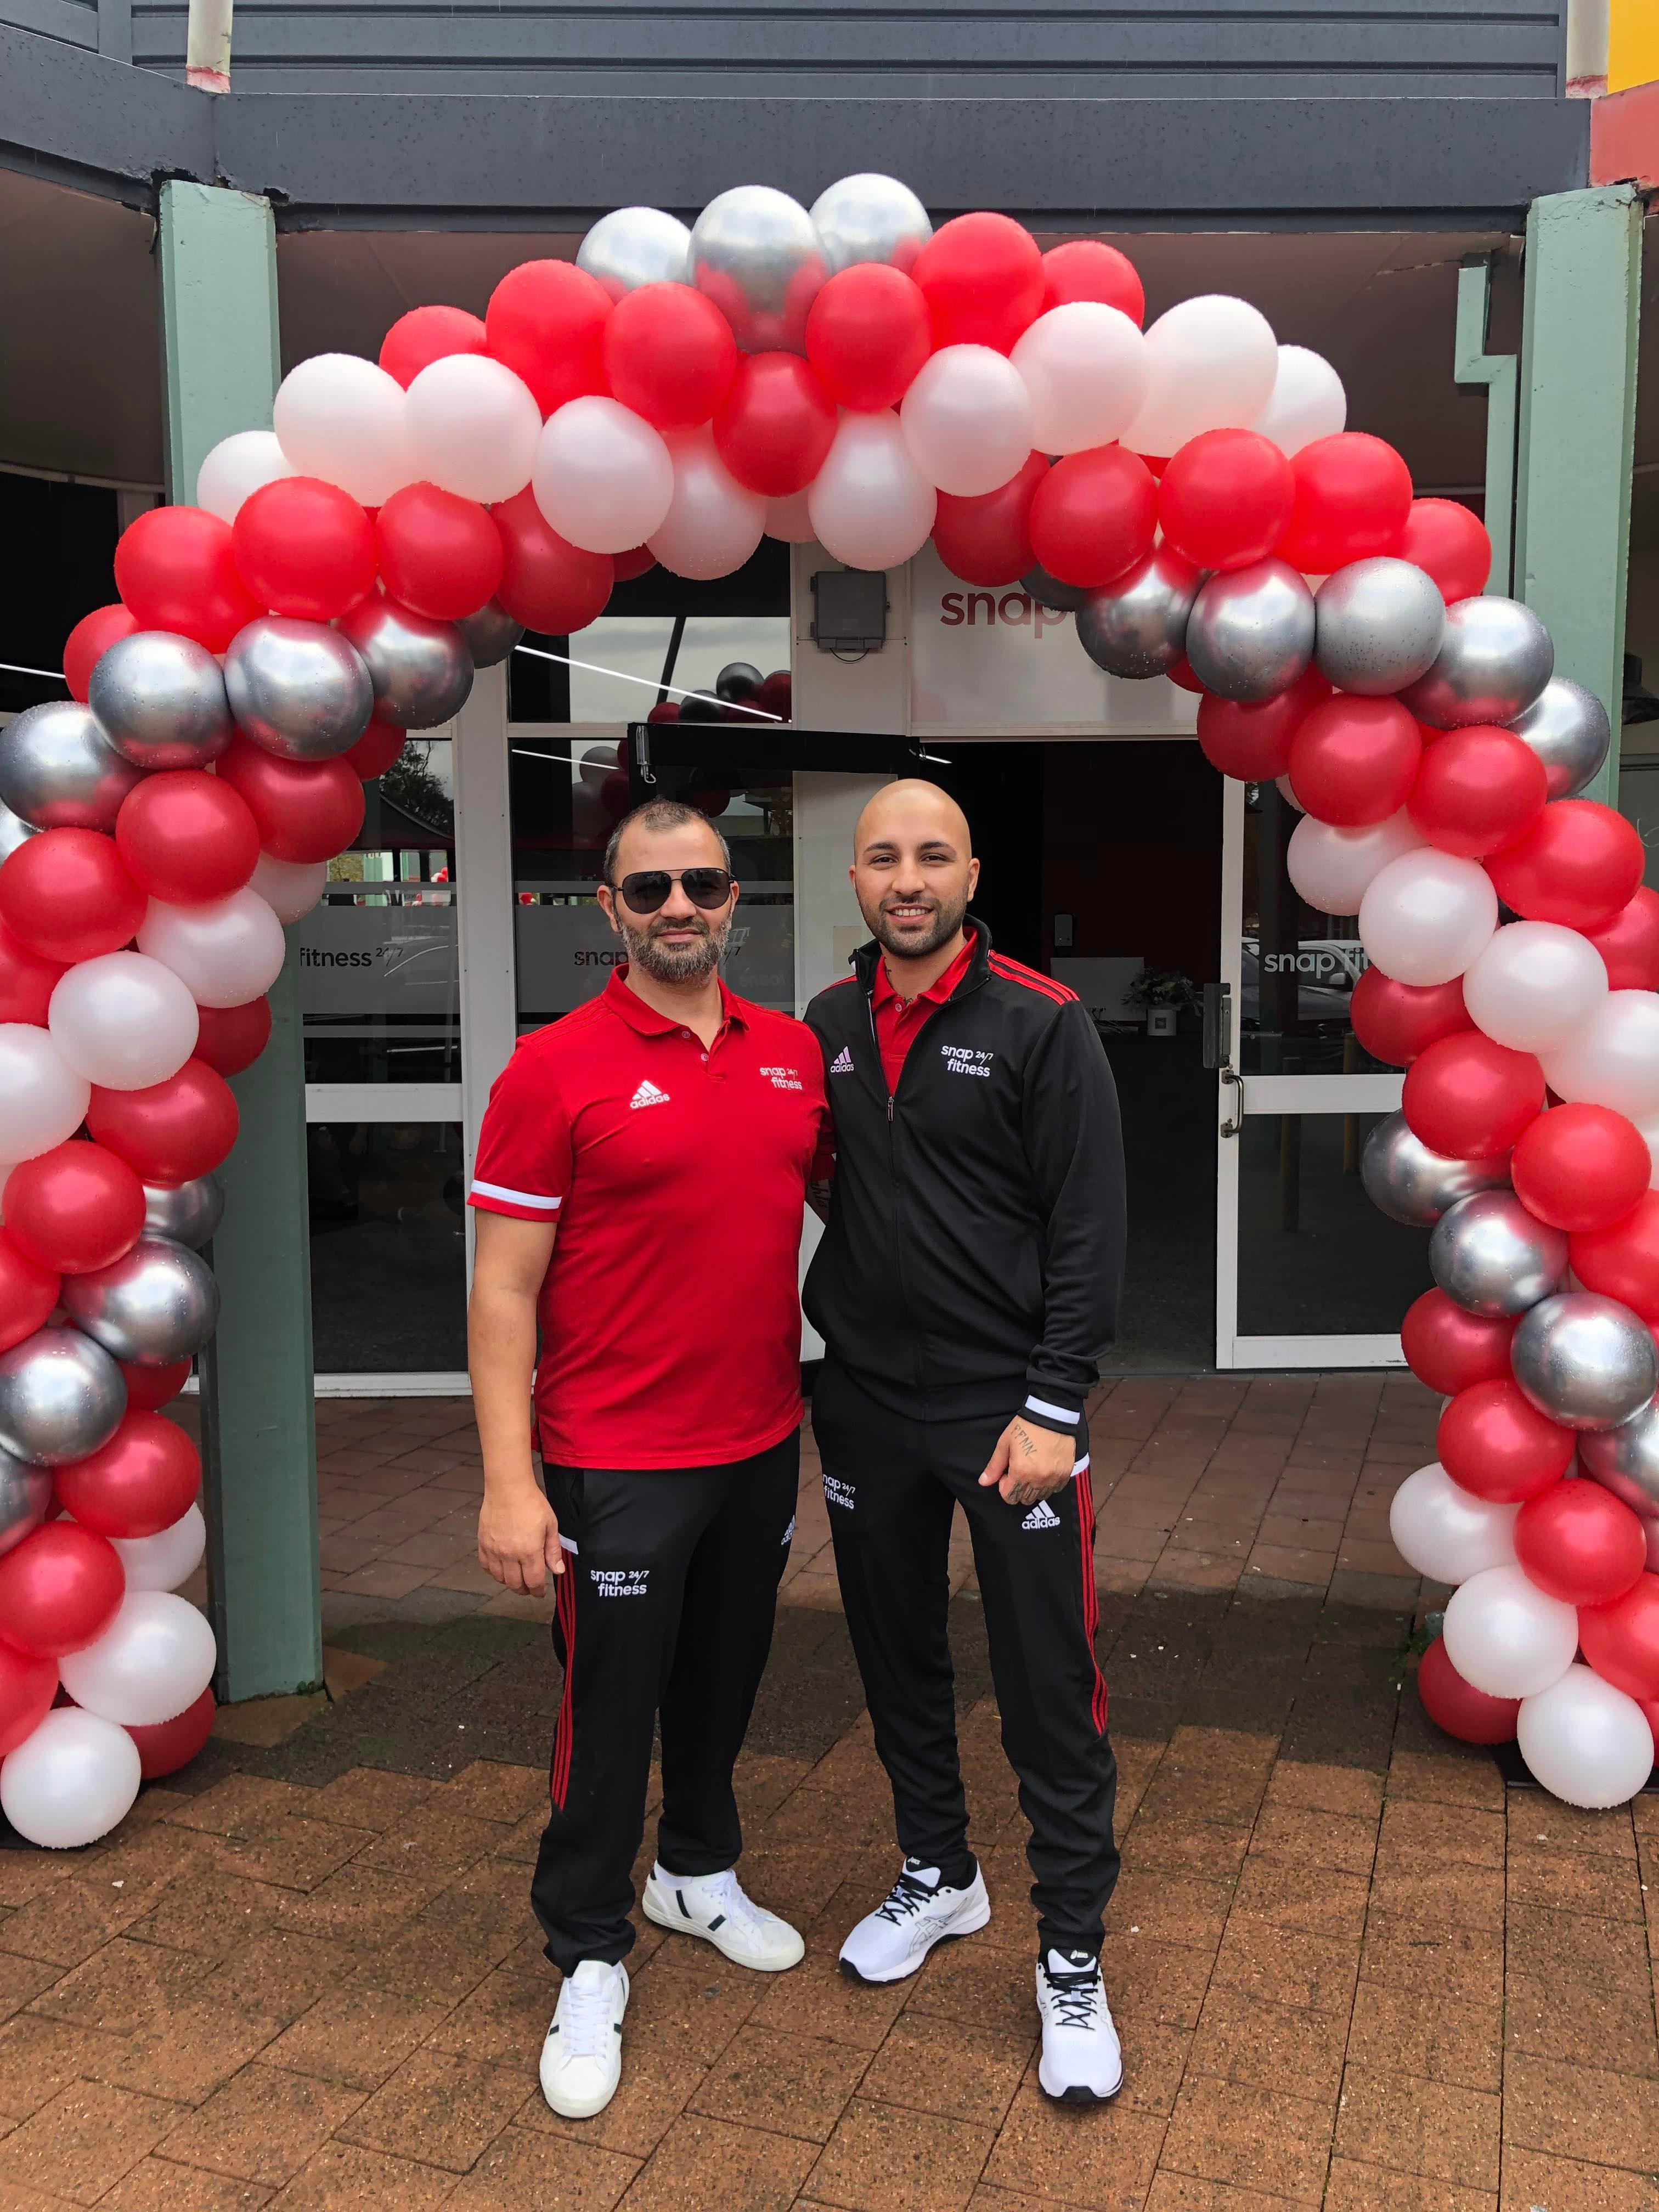 Balloon Arch - Gym Exterior Snap Fitness 24/7 Mayfield Mayfield 0422 426 596